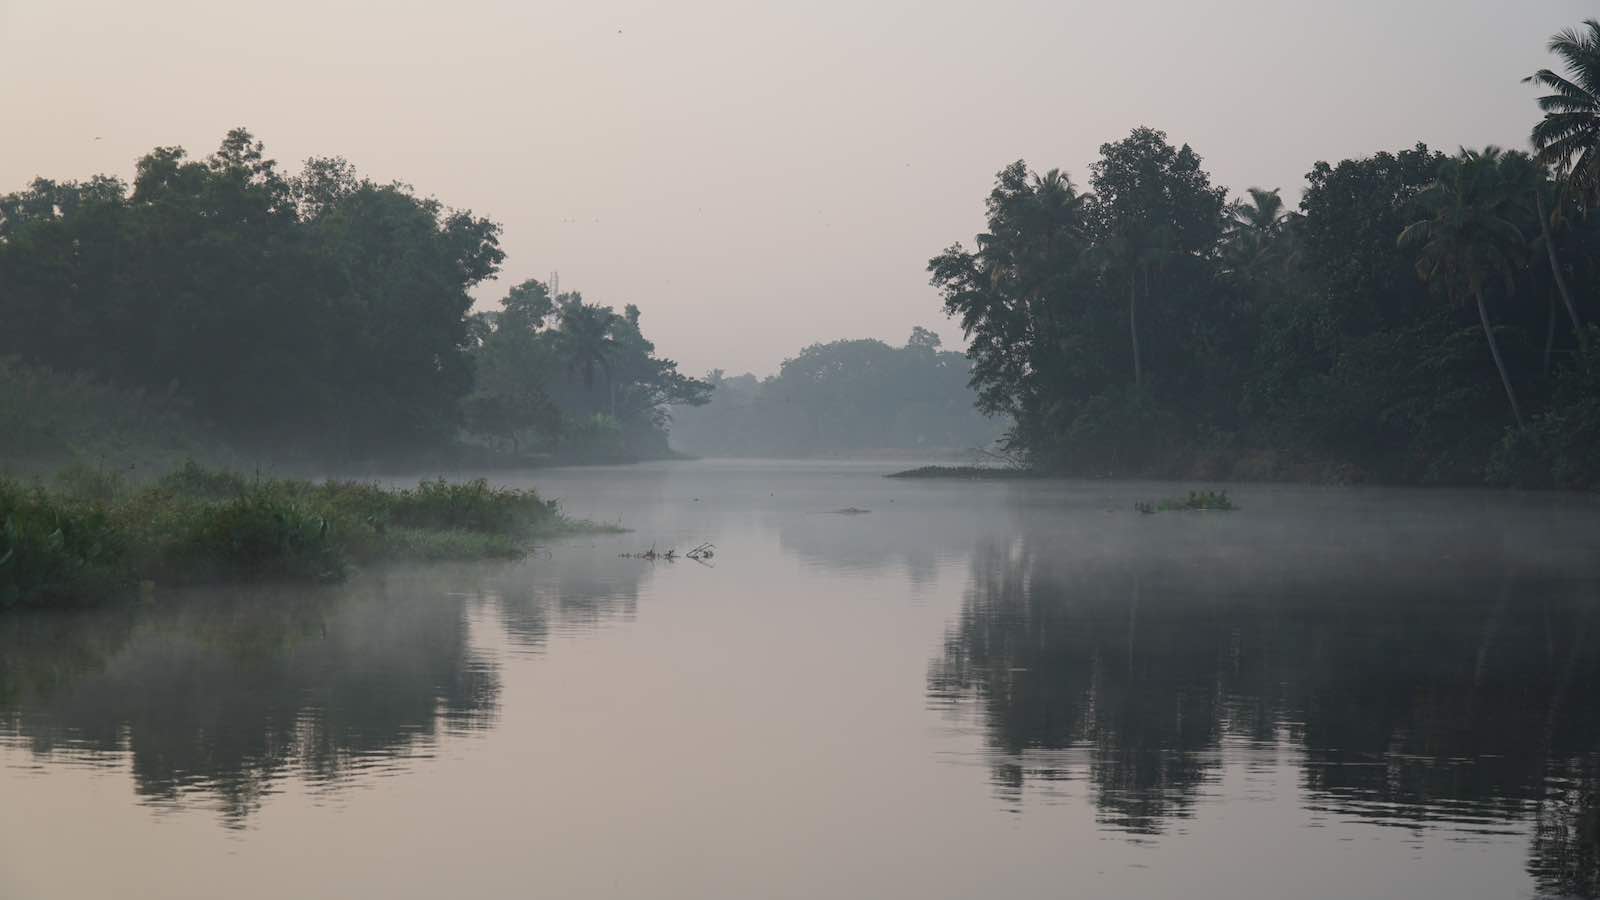 The view from the boat was incredible, we were headed down a misty river before sunrise.